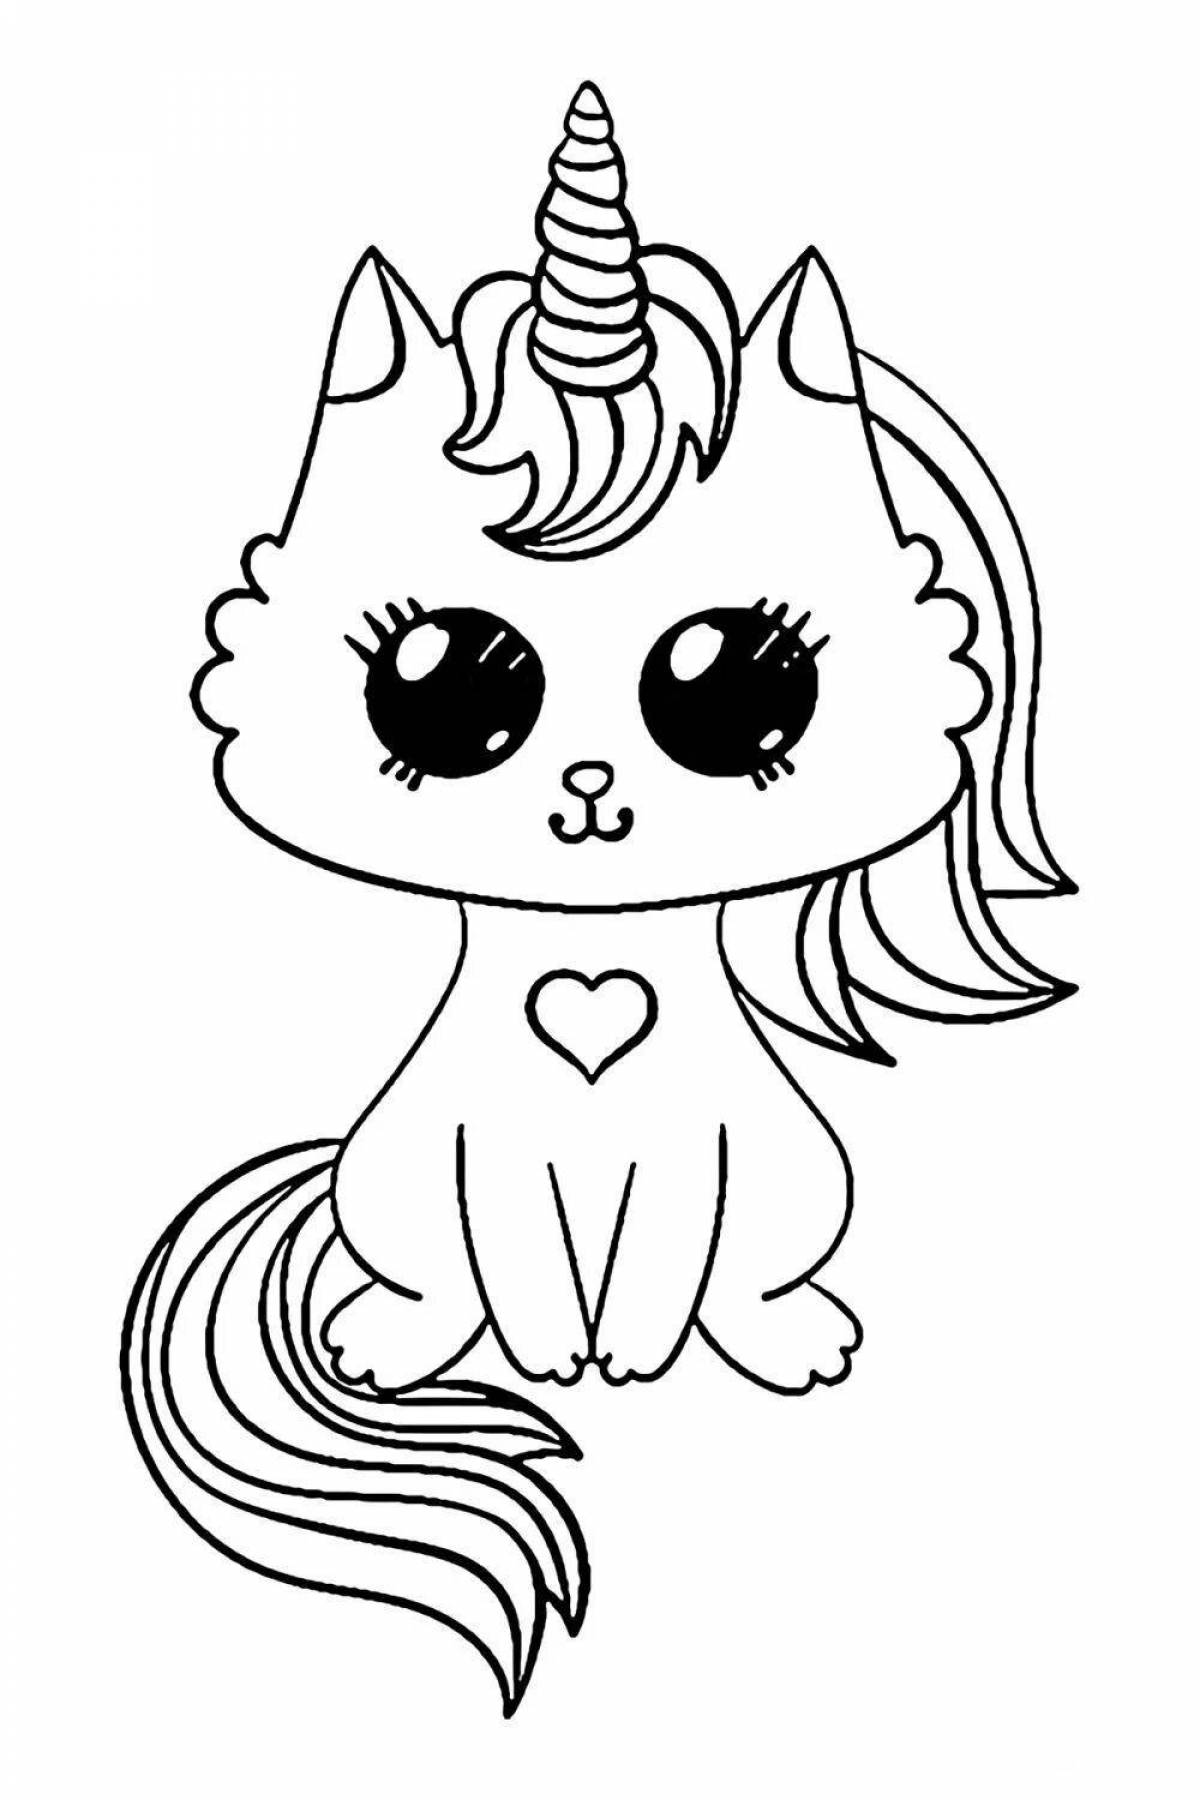 Outstanding unicorn cat coloring book for girls